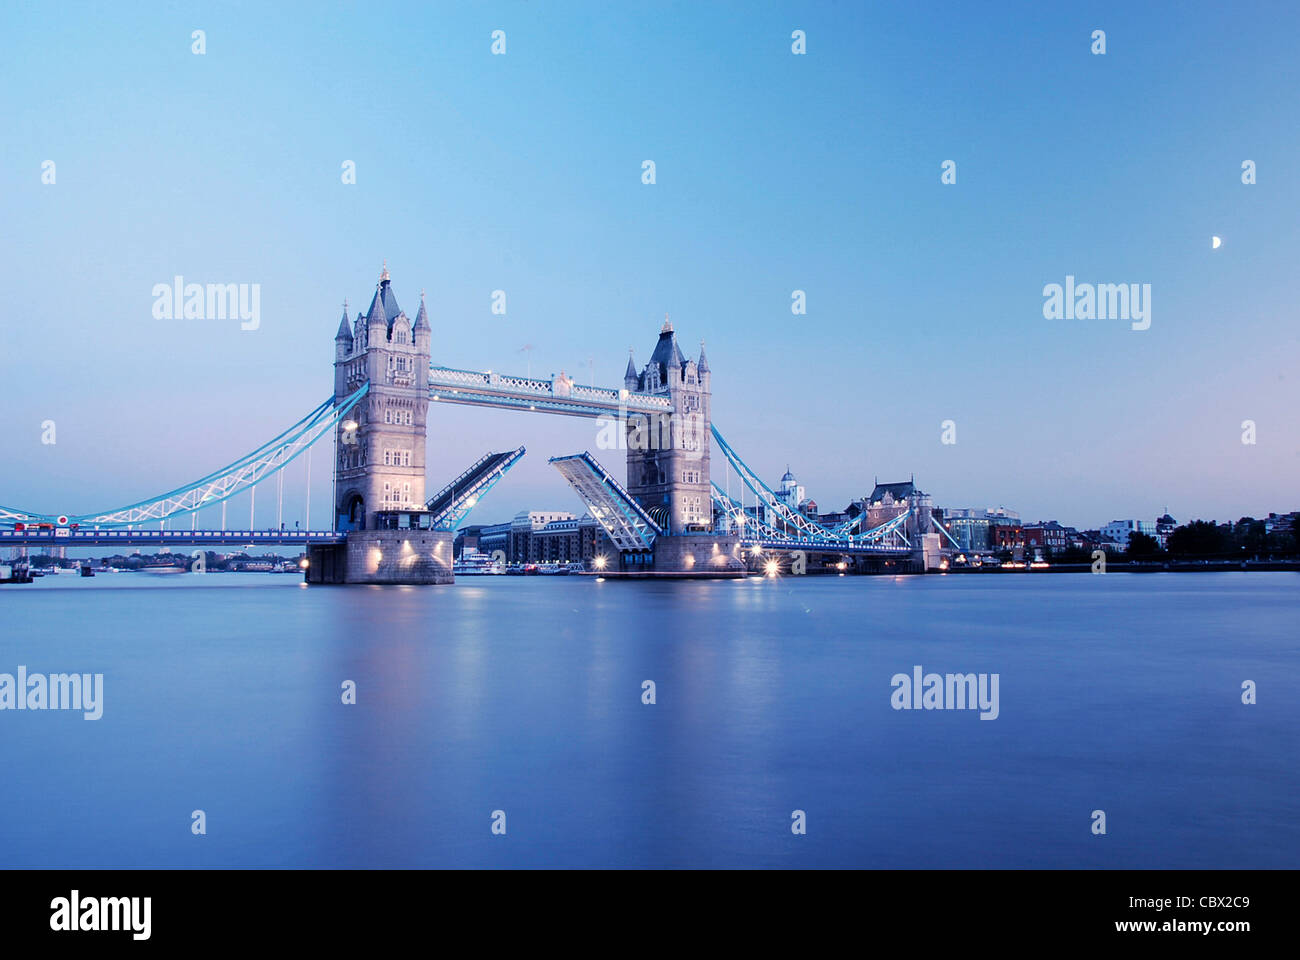 Tower Bridge at dusk, with the two towers lit up and Thames water looking blue. Stock Photo